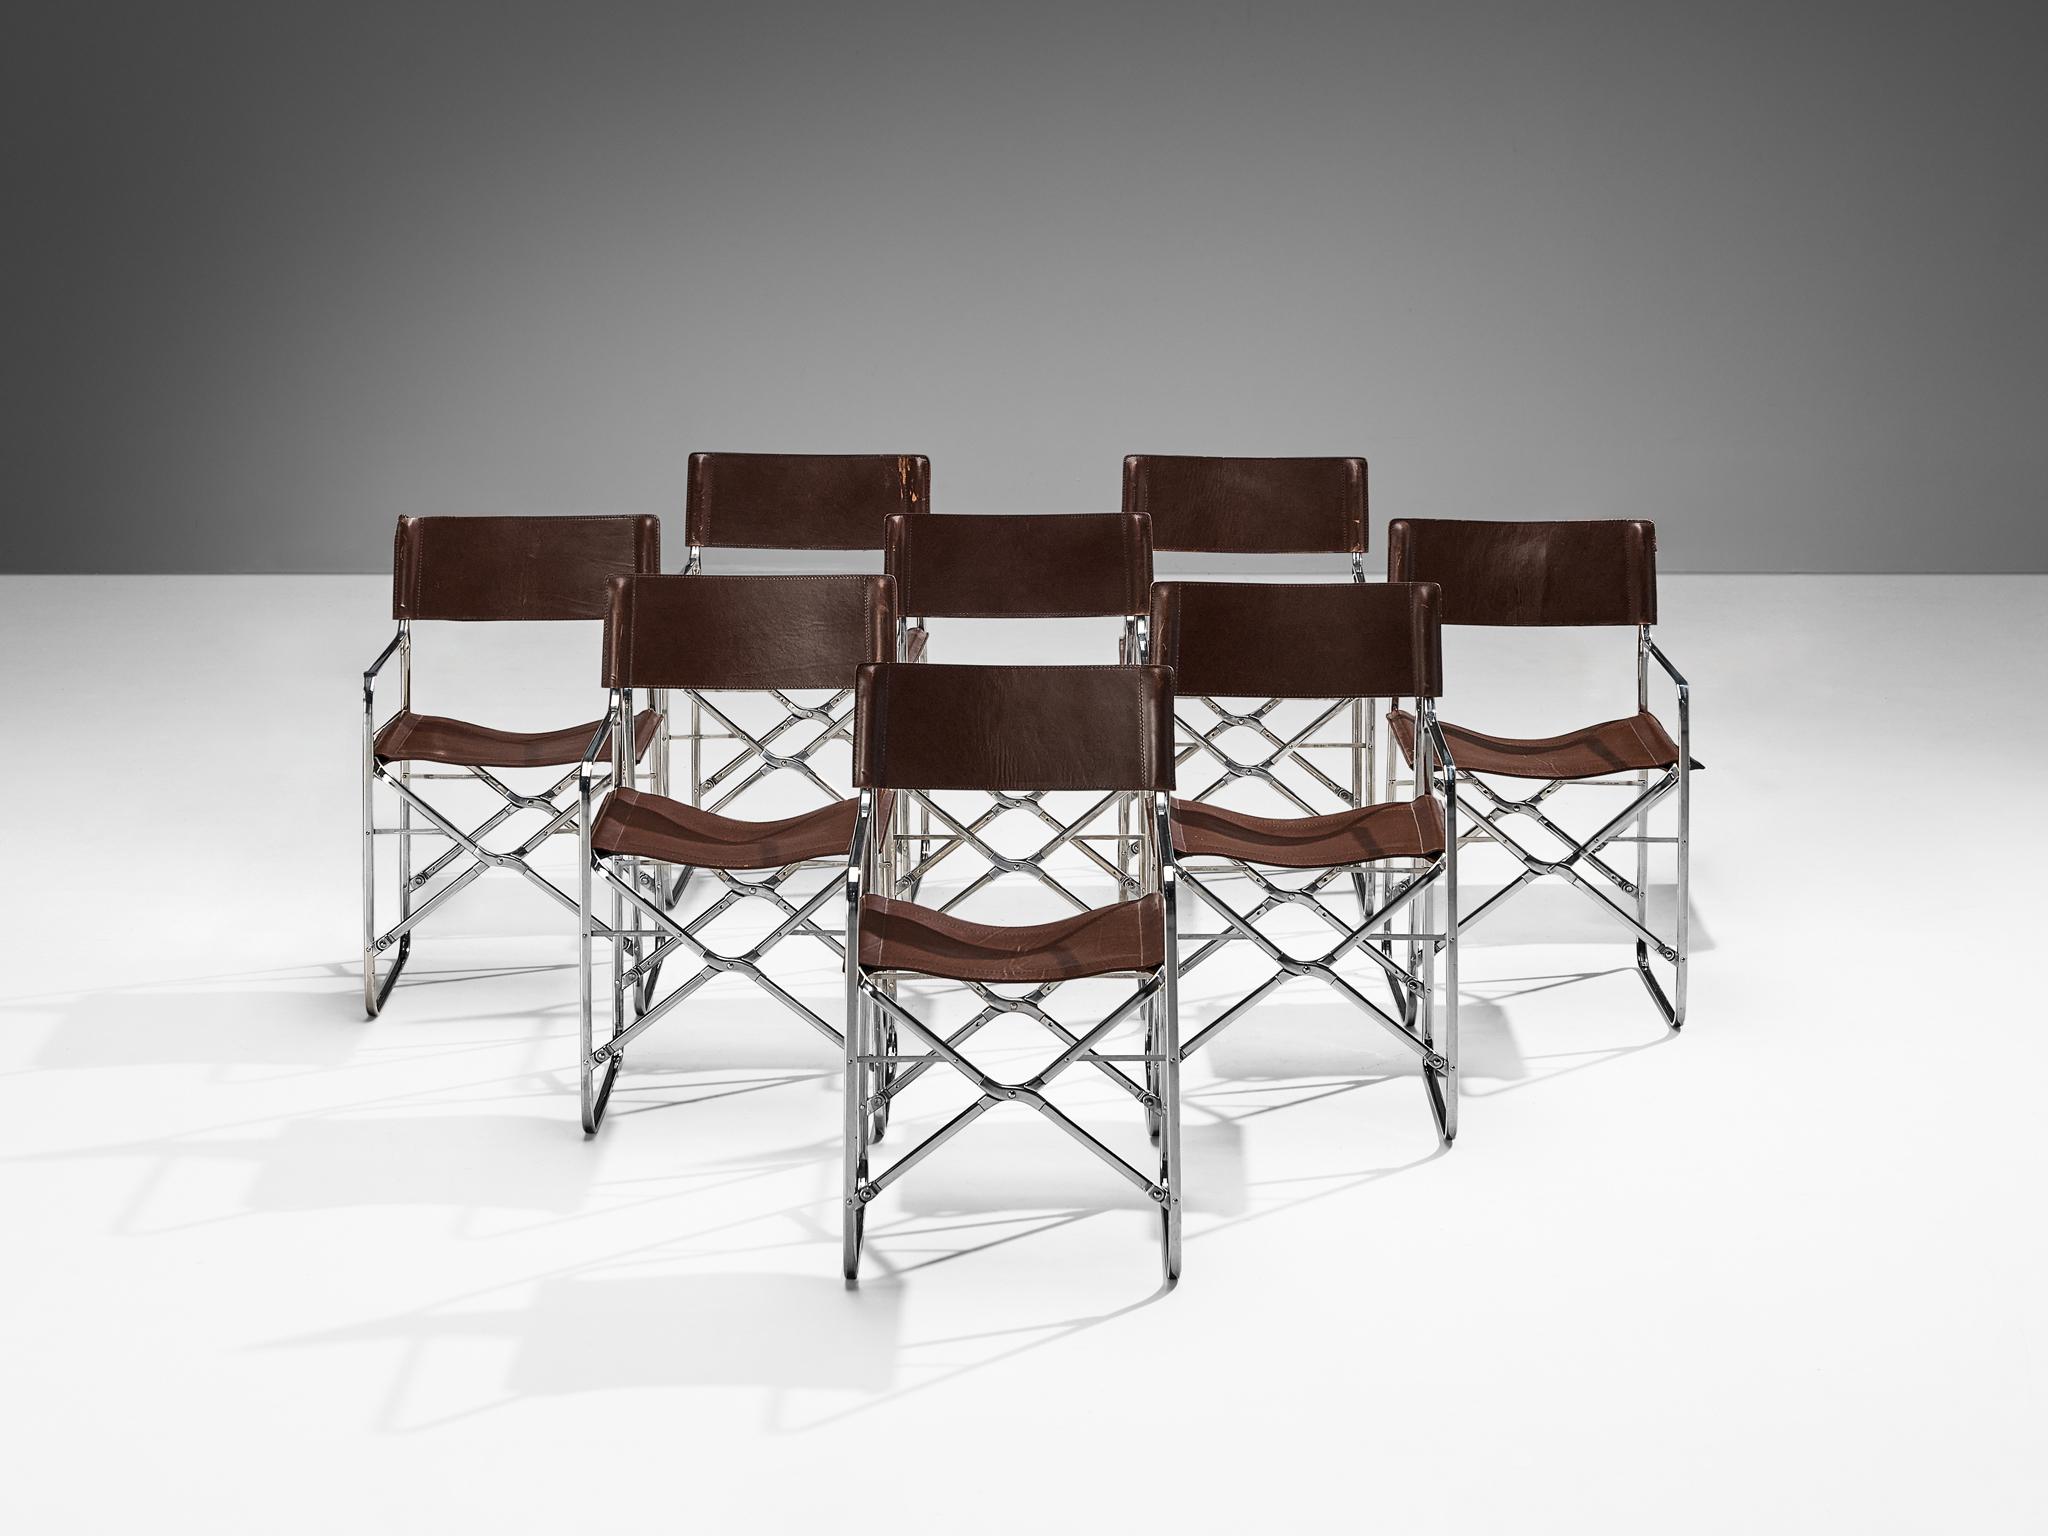 Gae Aulenti for Zanotta, set of eight 'April' folding armchairs, chrome-plated steel, aluminum, saddle leather, Italy, 1964

Gae Aulenti revolutionized the traditional notion of the director's chair by creating the groundbreaking and versatile